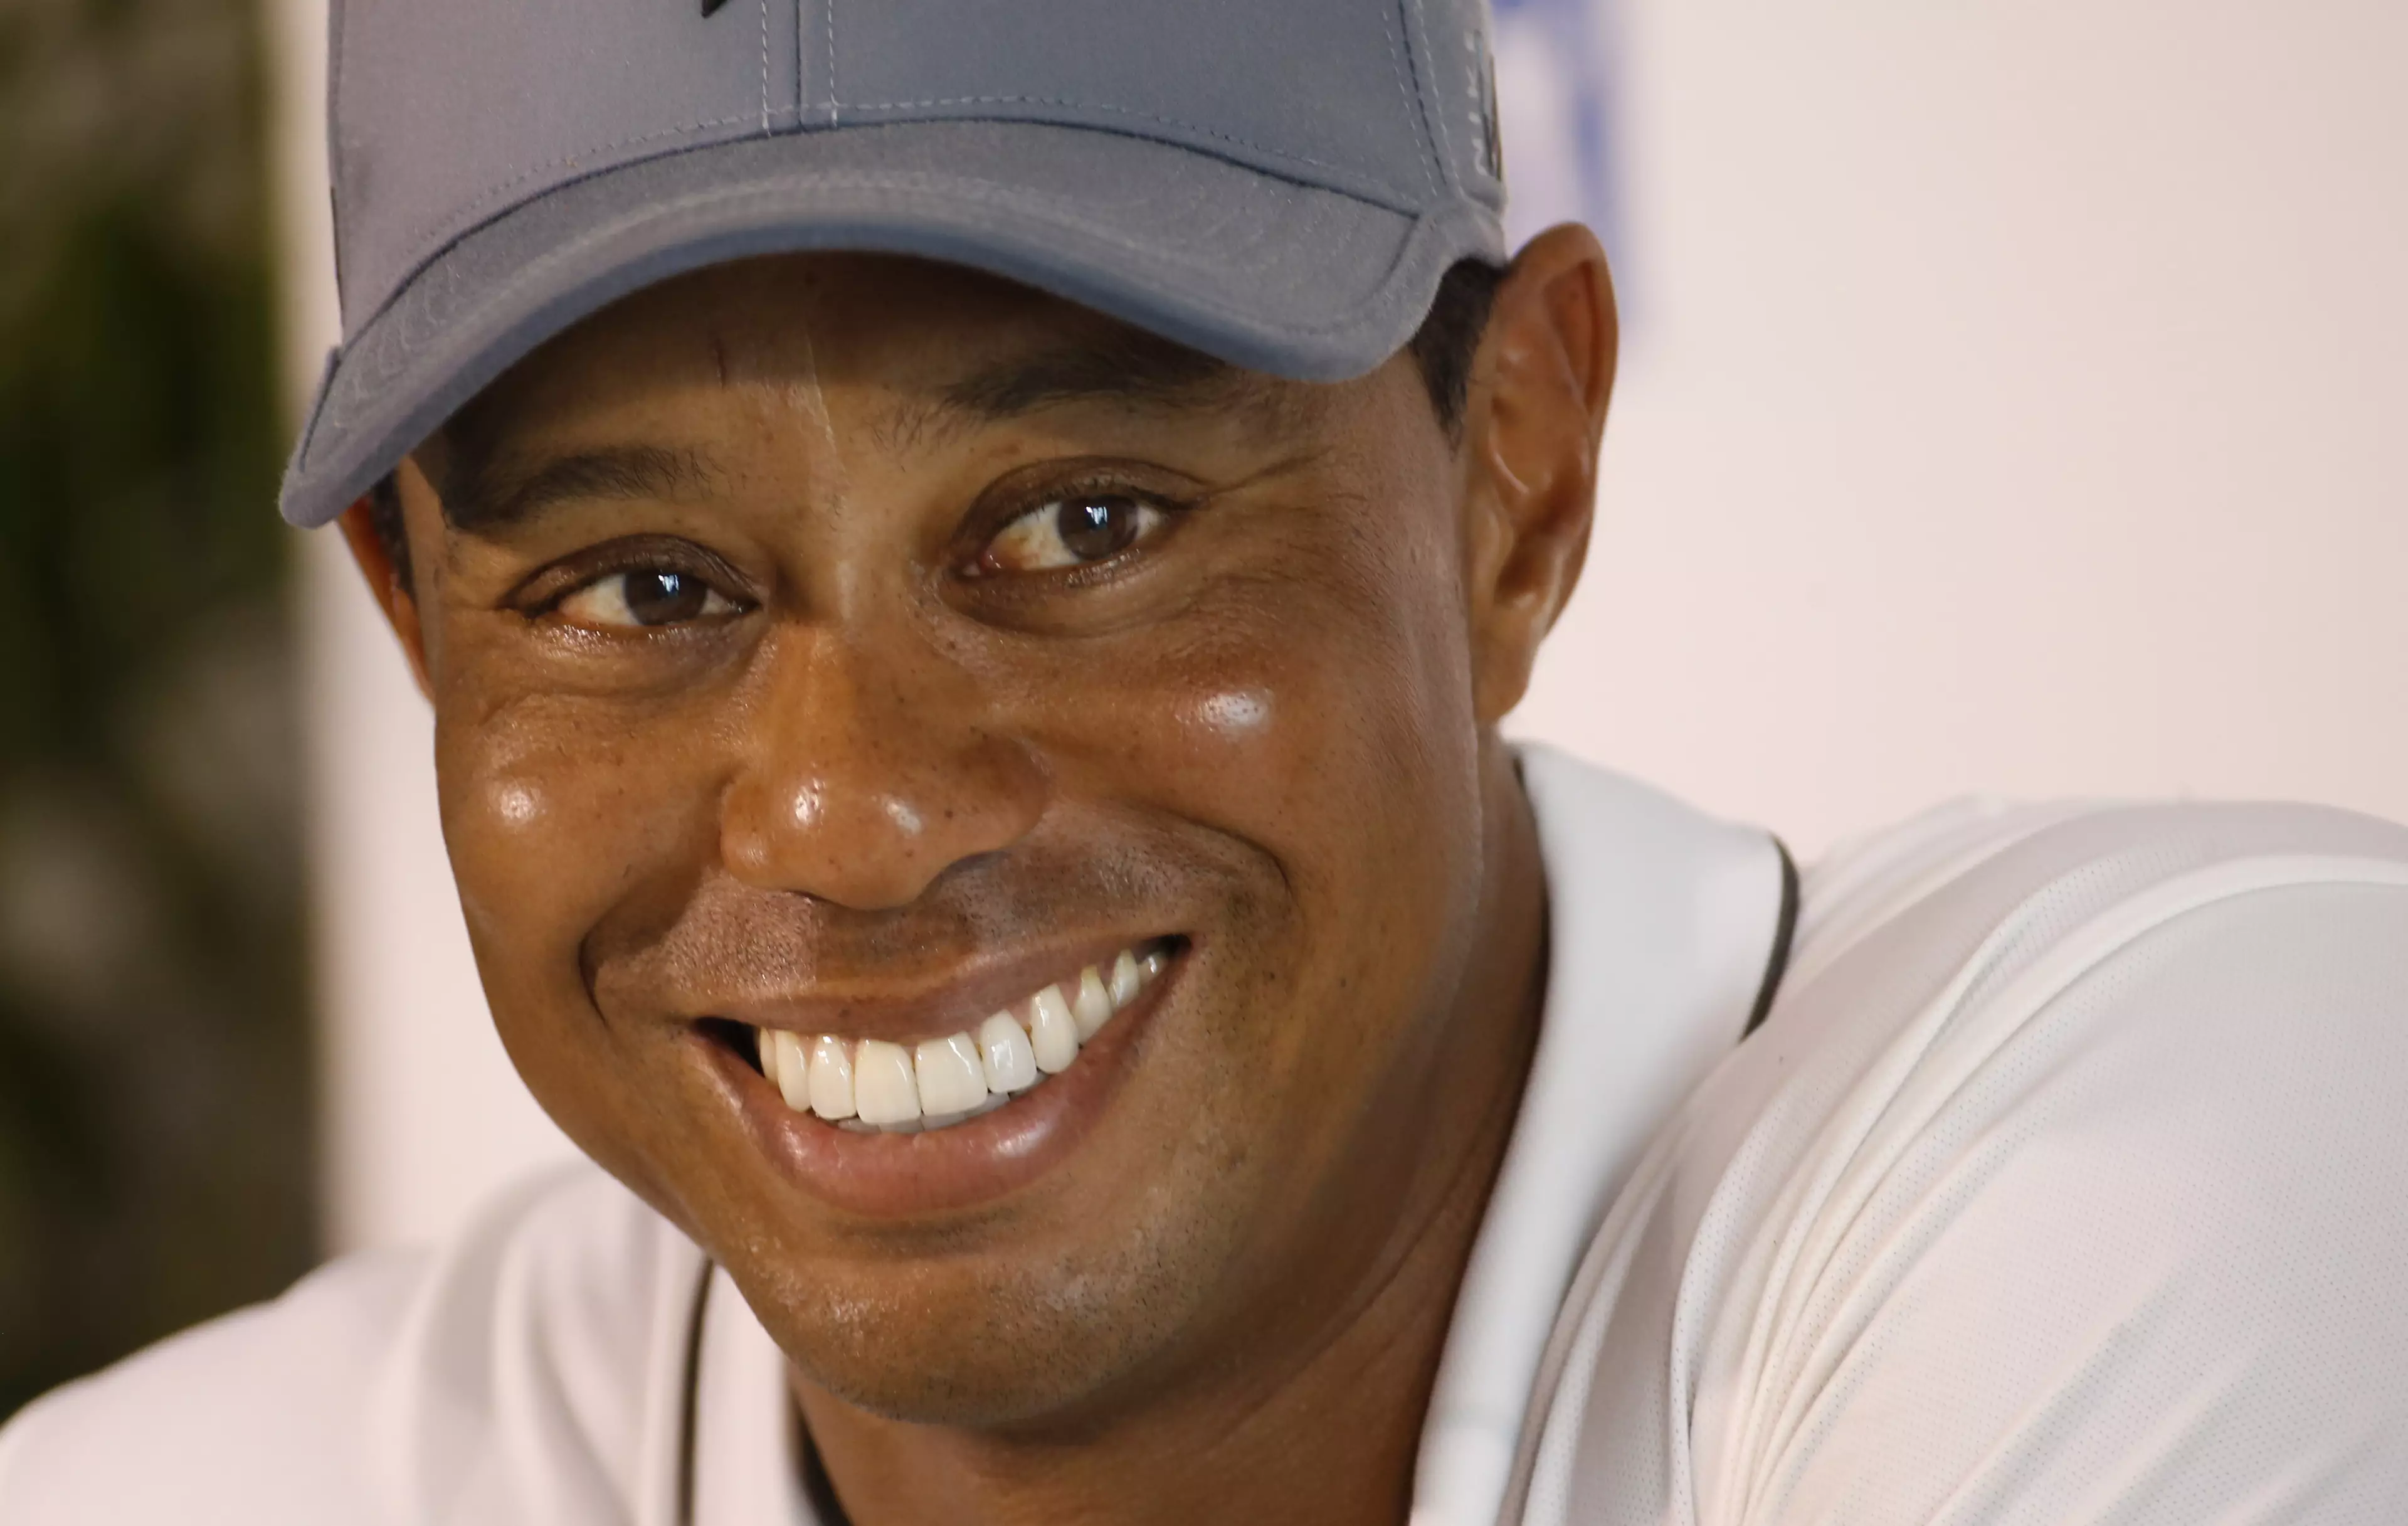 Tiger Woods To Make Comeback Next Month